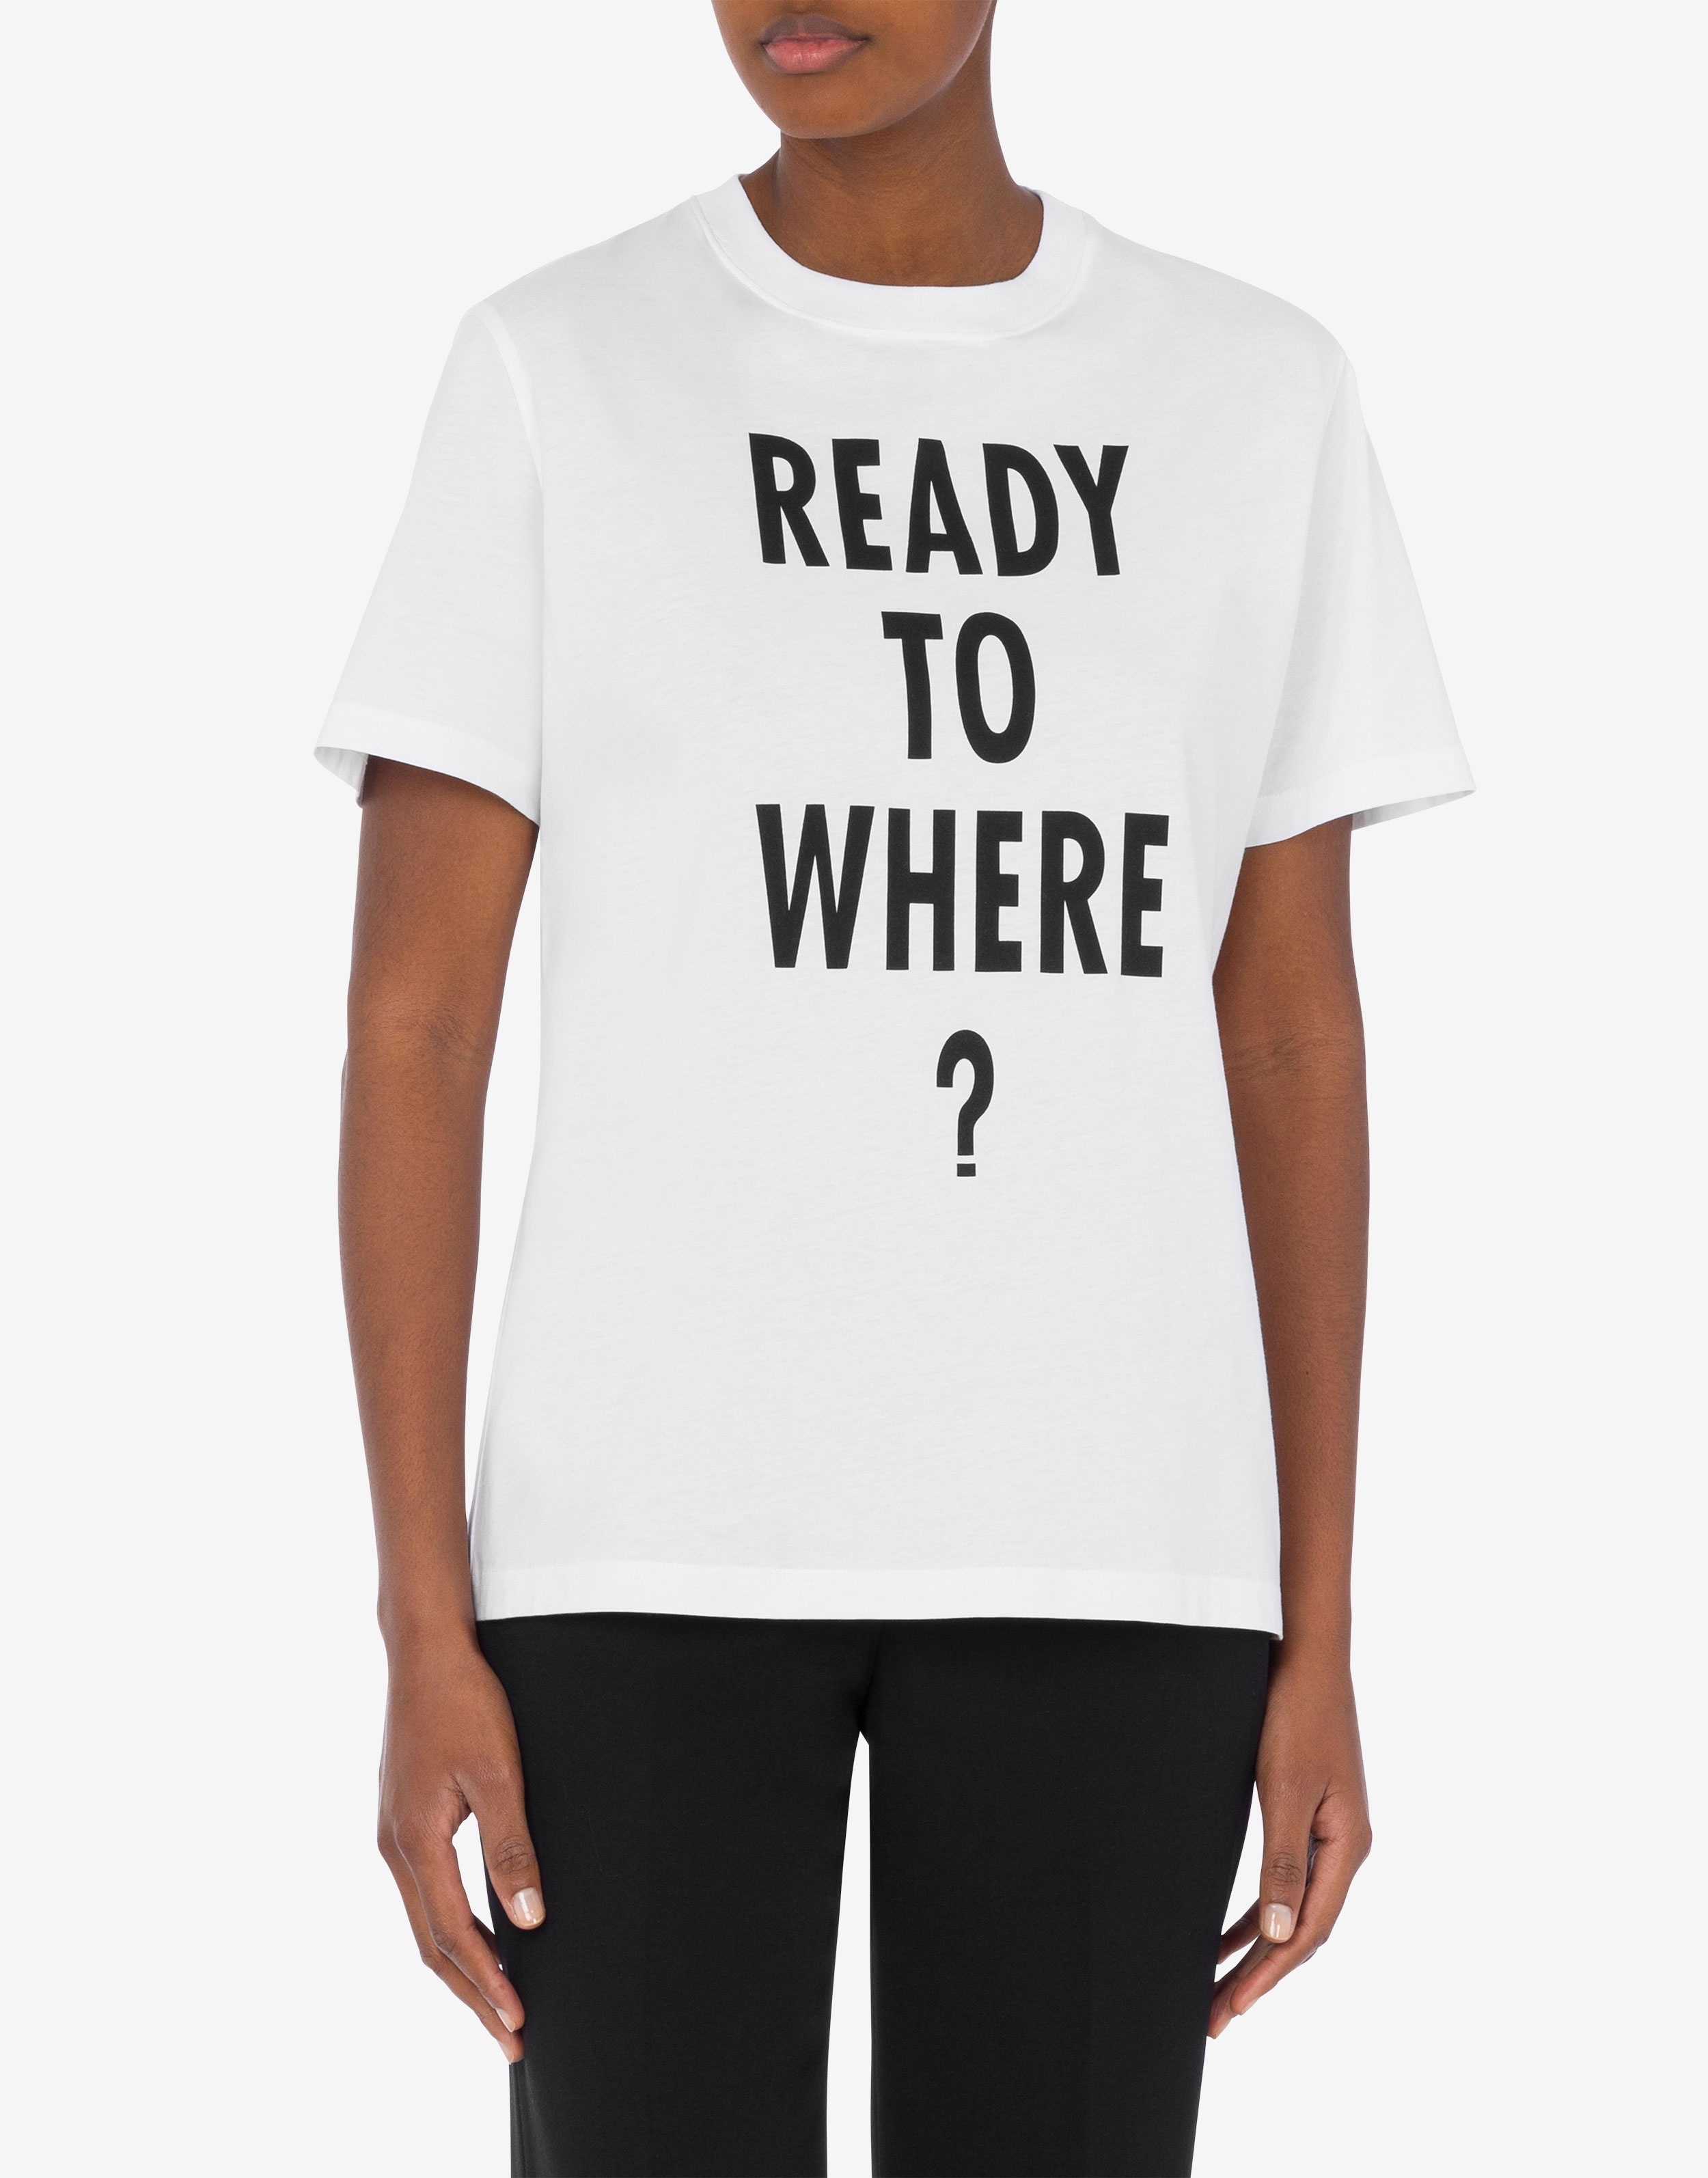 READY TO WHERE? JERSEY T-SHIRT - 2